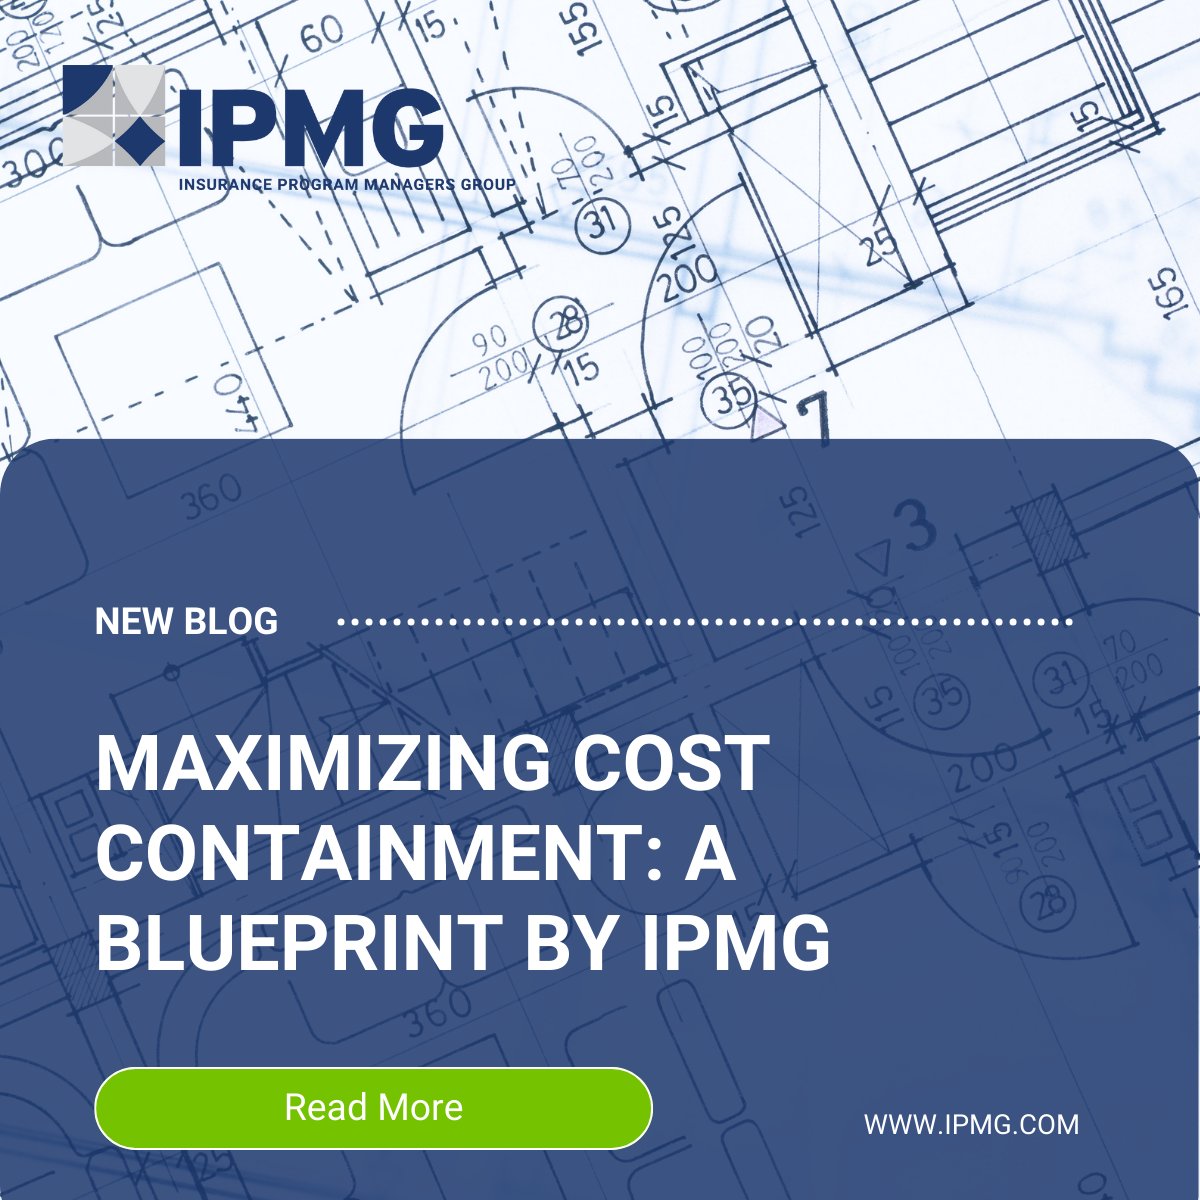 Discover the Blueprint for Maximizing Cost Containment with IPMG! We’re not just about providing third-party administration services - we're about revolutionizing cost containment in insurance! 

hubs.ly/Q02sCCVg0

#CostContainment #Insurance #TPA #Innovation #IPMG